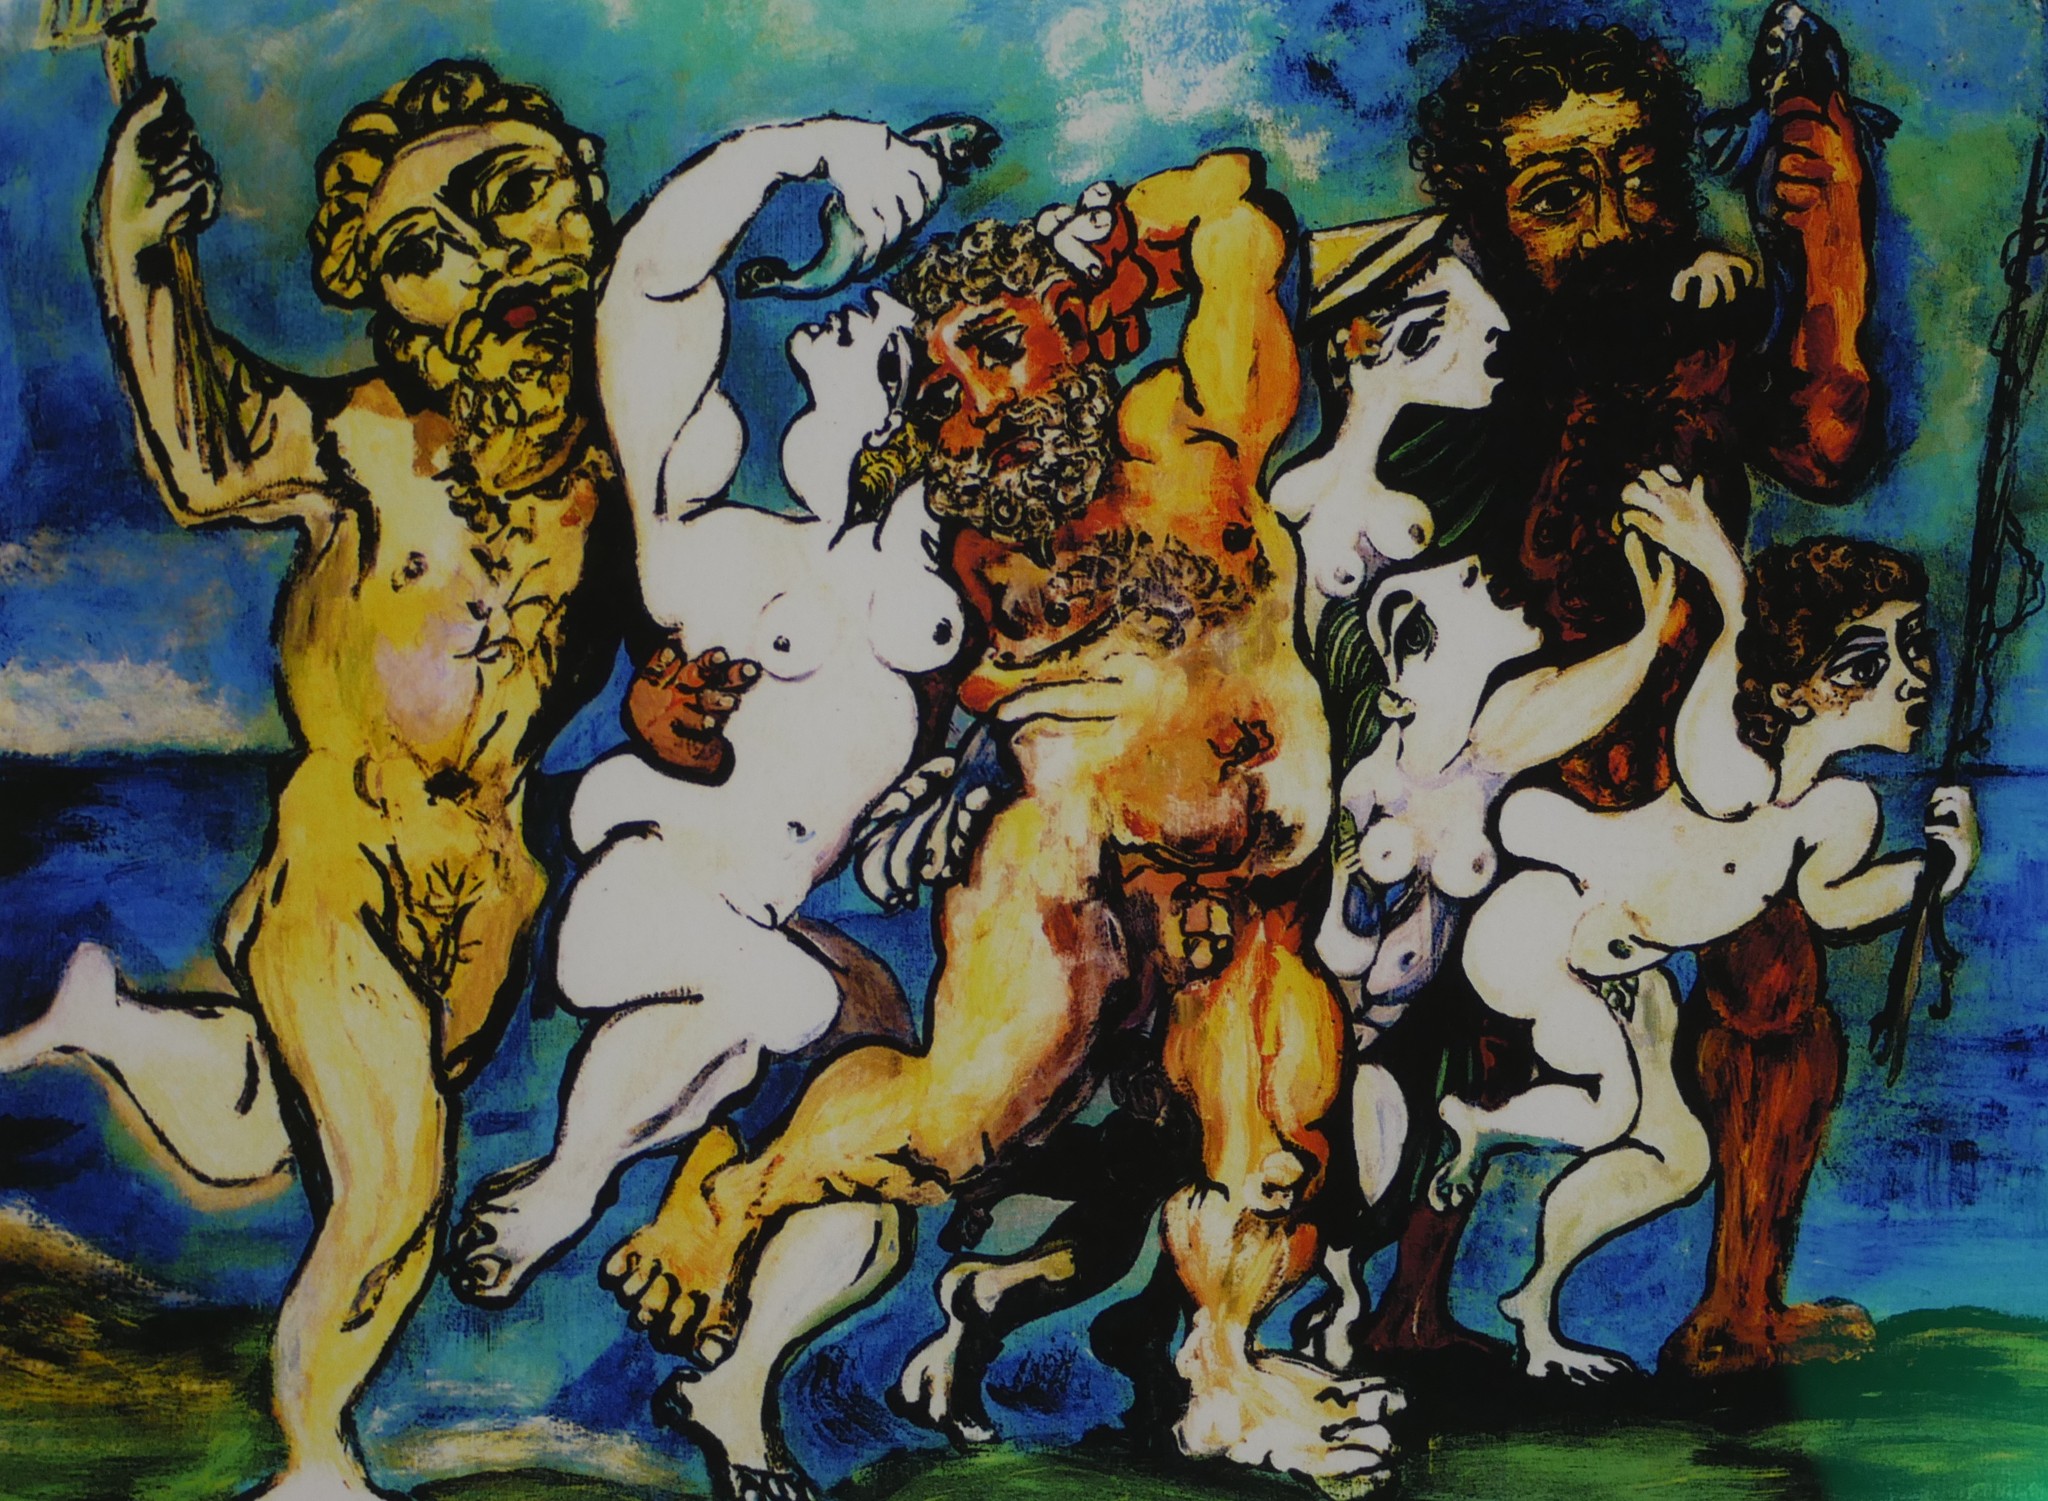 After Pablo Picasso (1881-1973), Silenus Dancing in Company, a coloured limited Collection Domaine